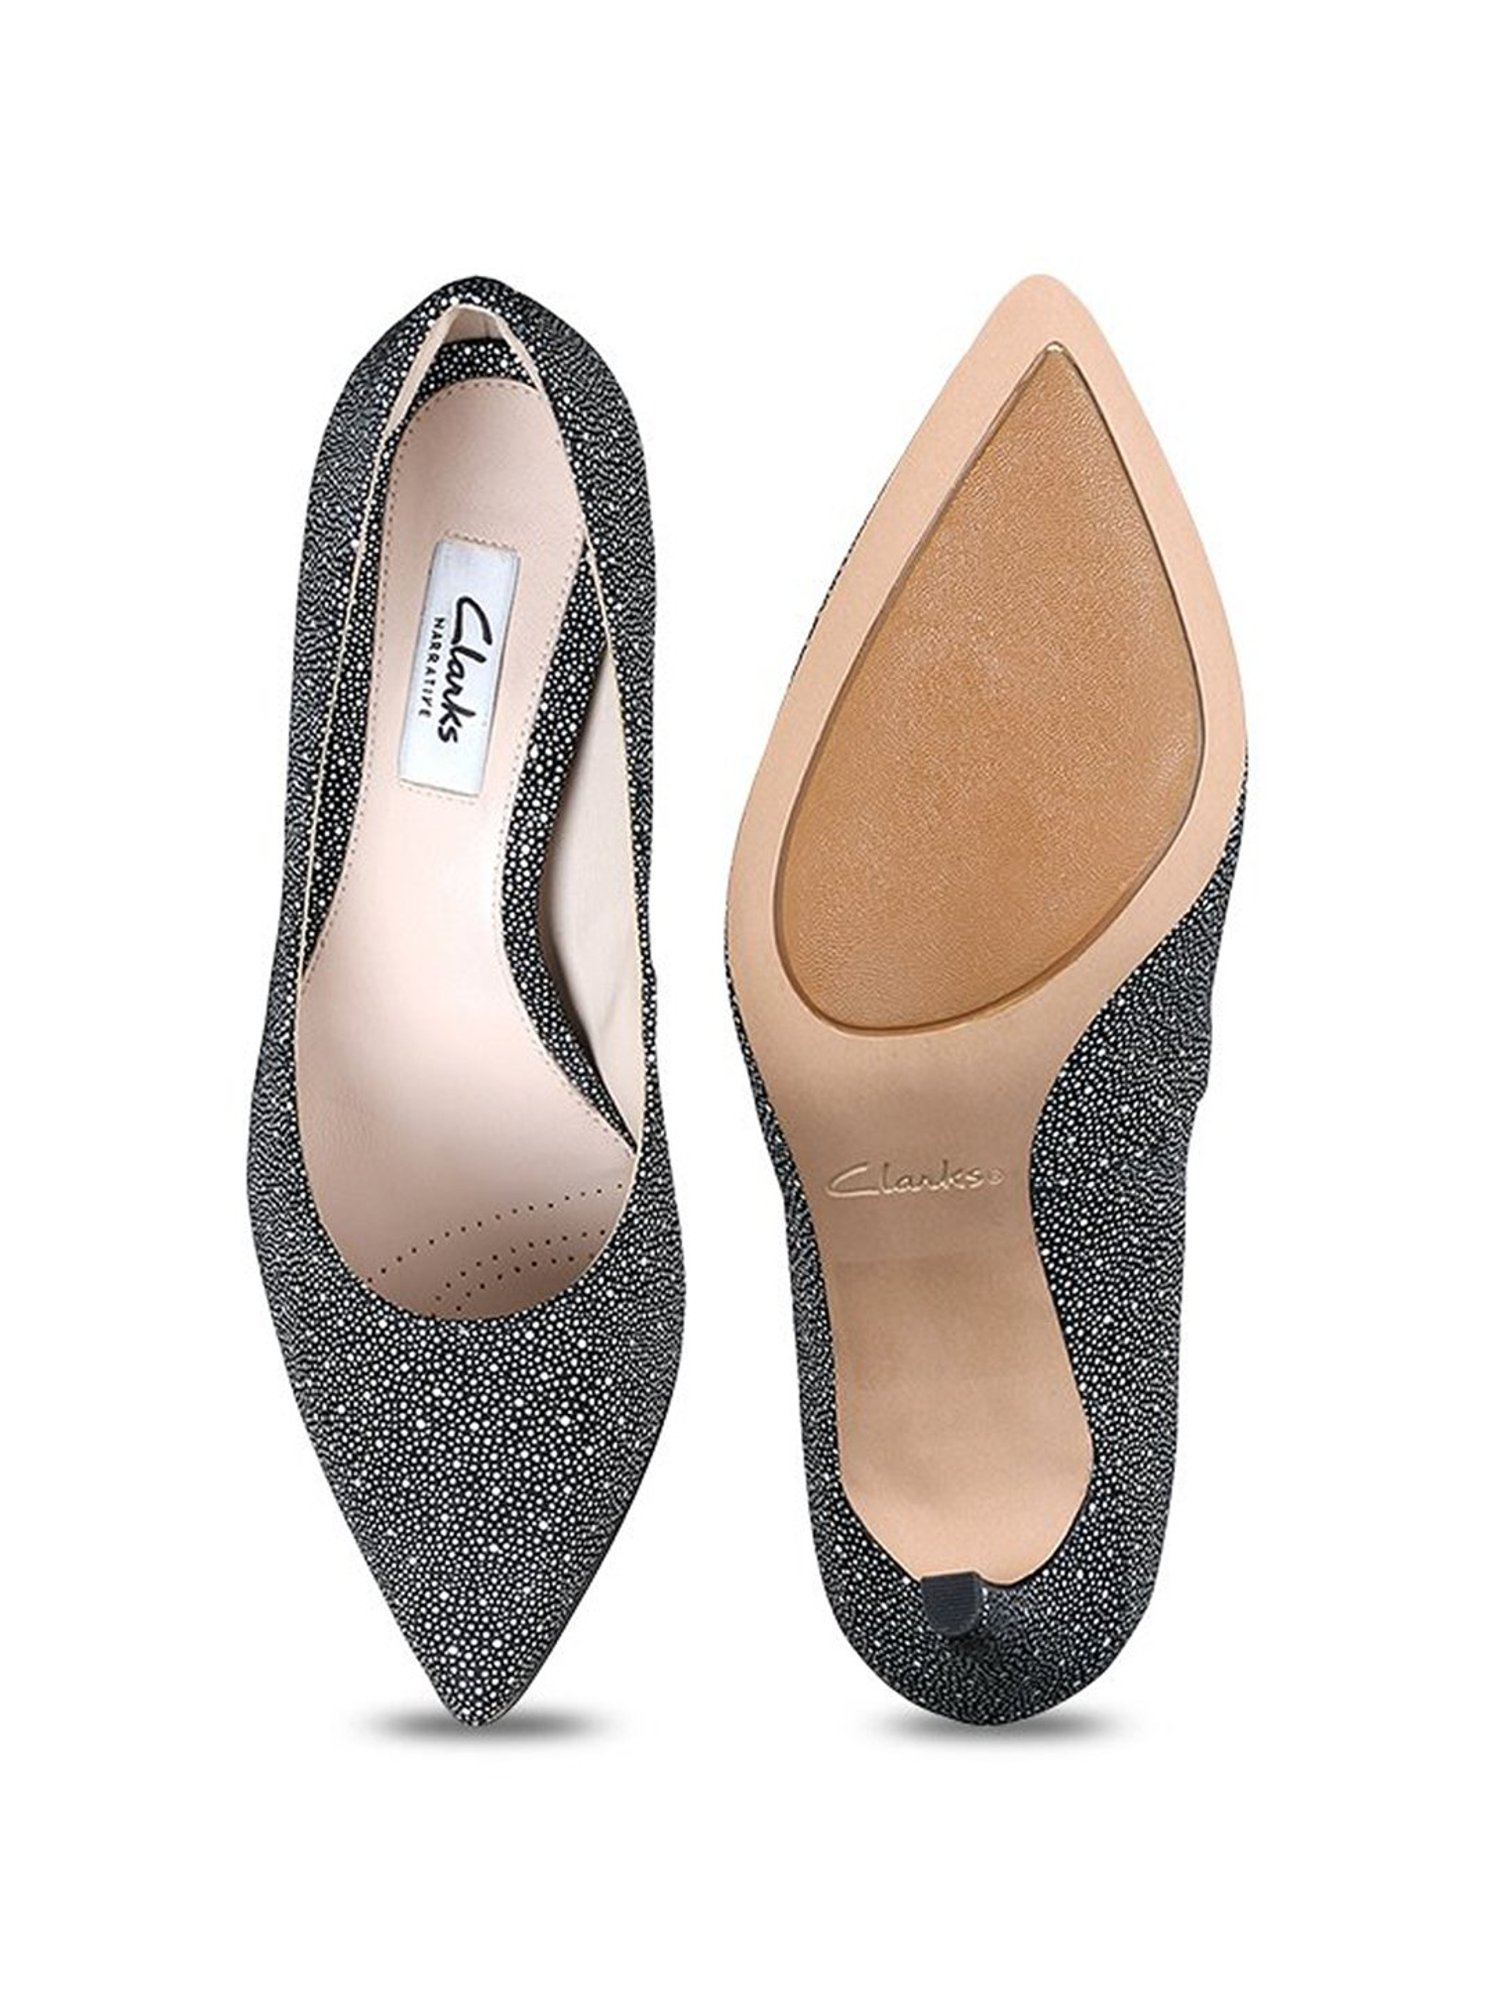 Buy Clarks Dinah Keer Black White Stiletto Pumps for at Best @ Tata CLiQ